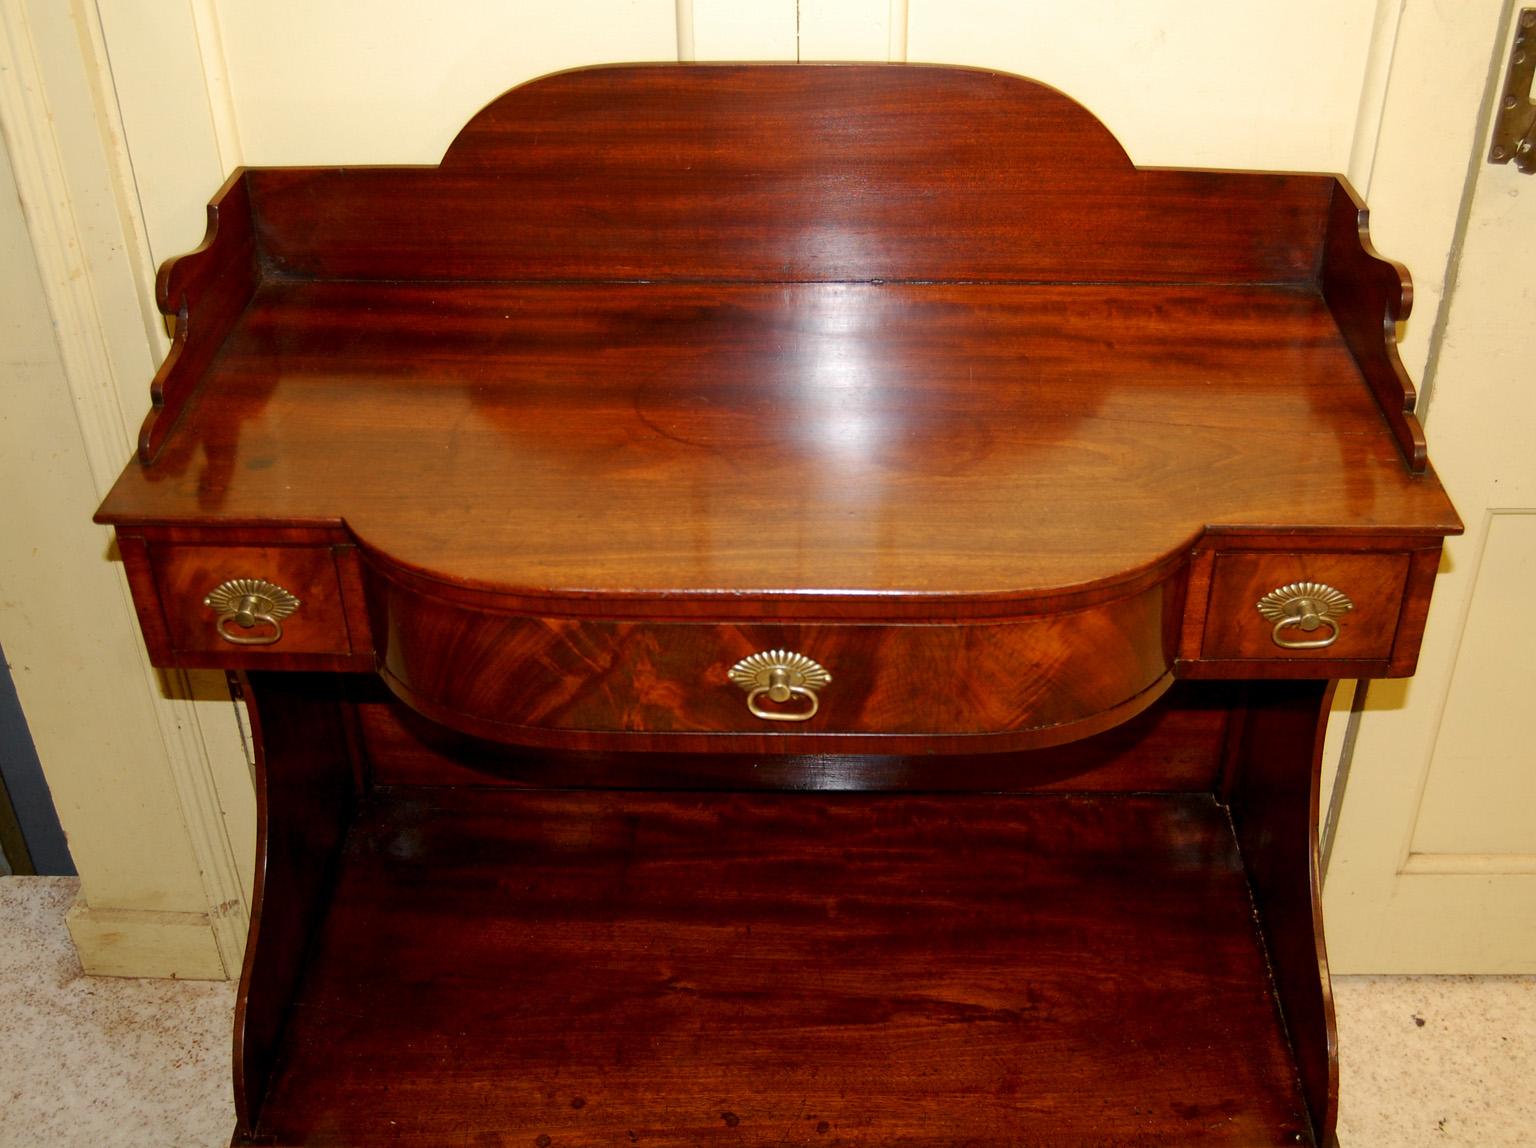 19th Century American Sheraton Mahogany Bowfront Two Tier Side Table with Drawers and Gallery